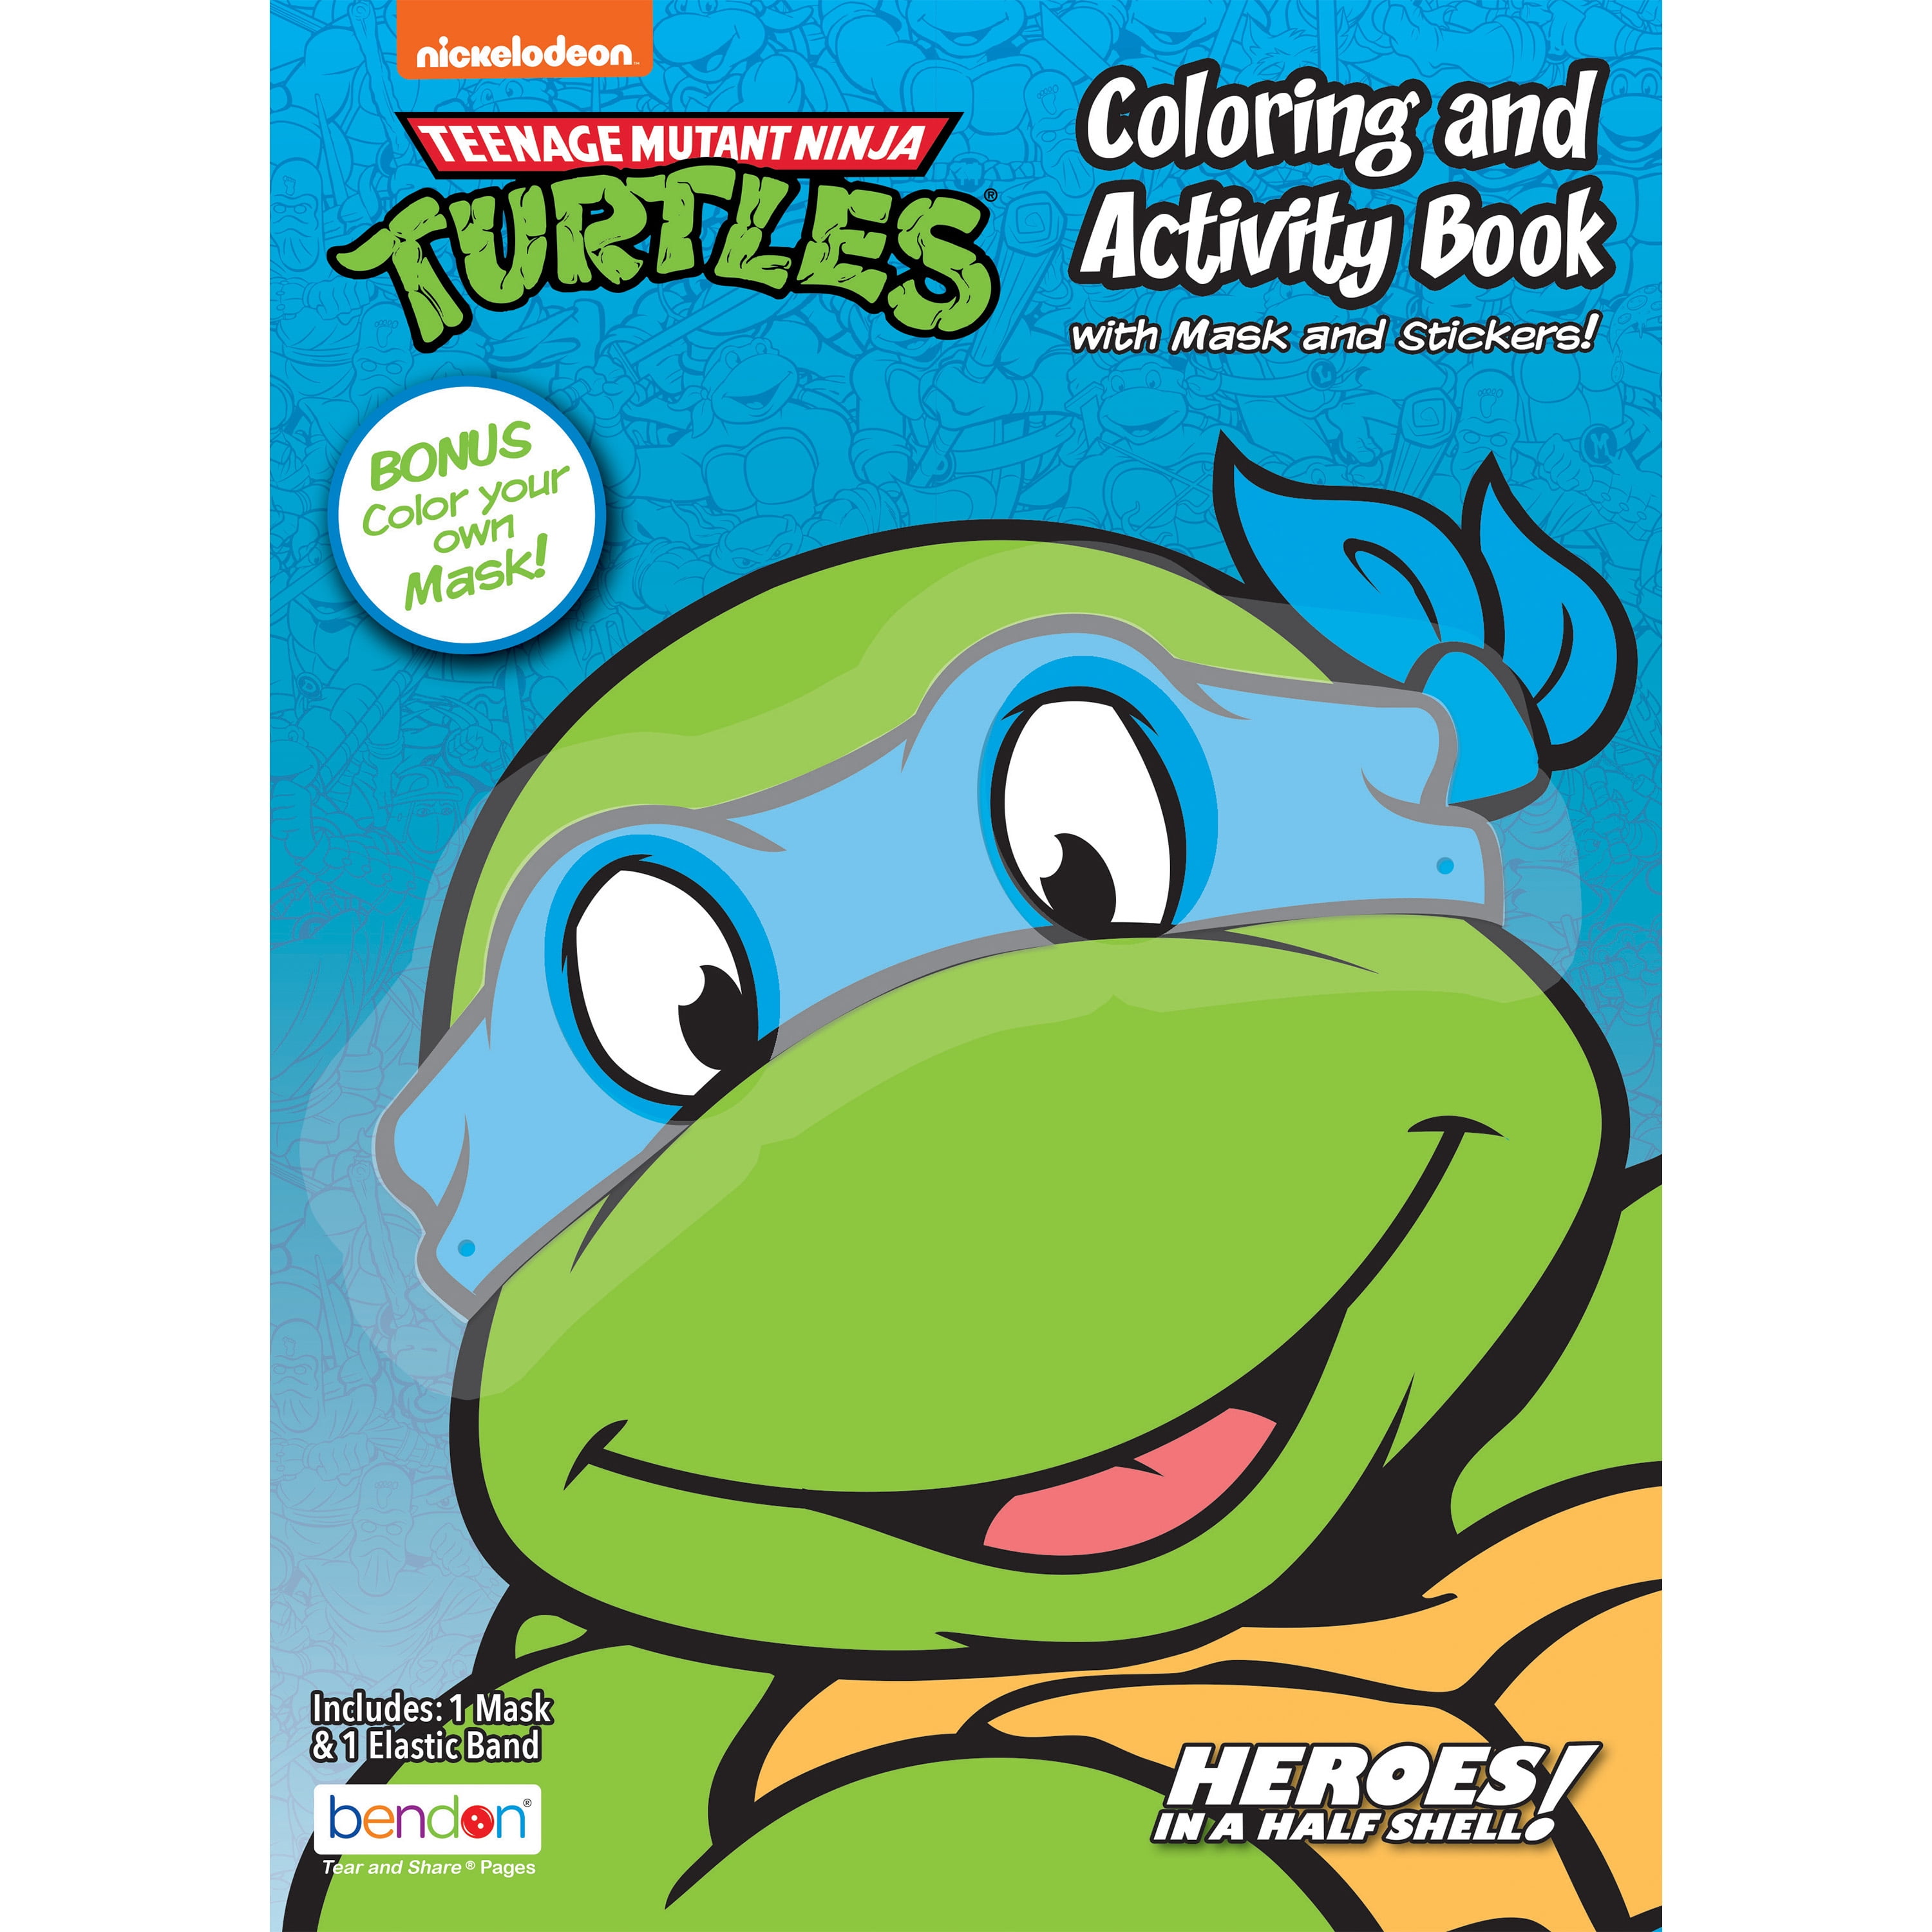 Teenage Mutant Ninja Turtles Coloring and Activity Book with Paper Mask, 48 Pages, Paperback Children's Book